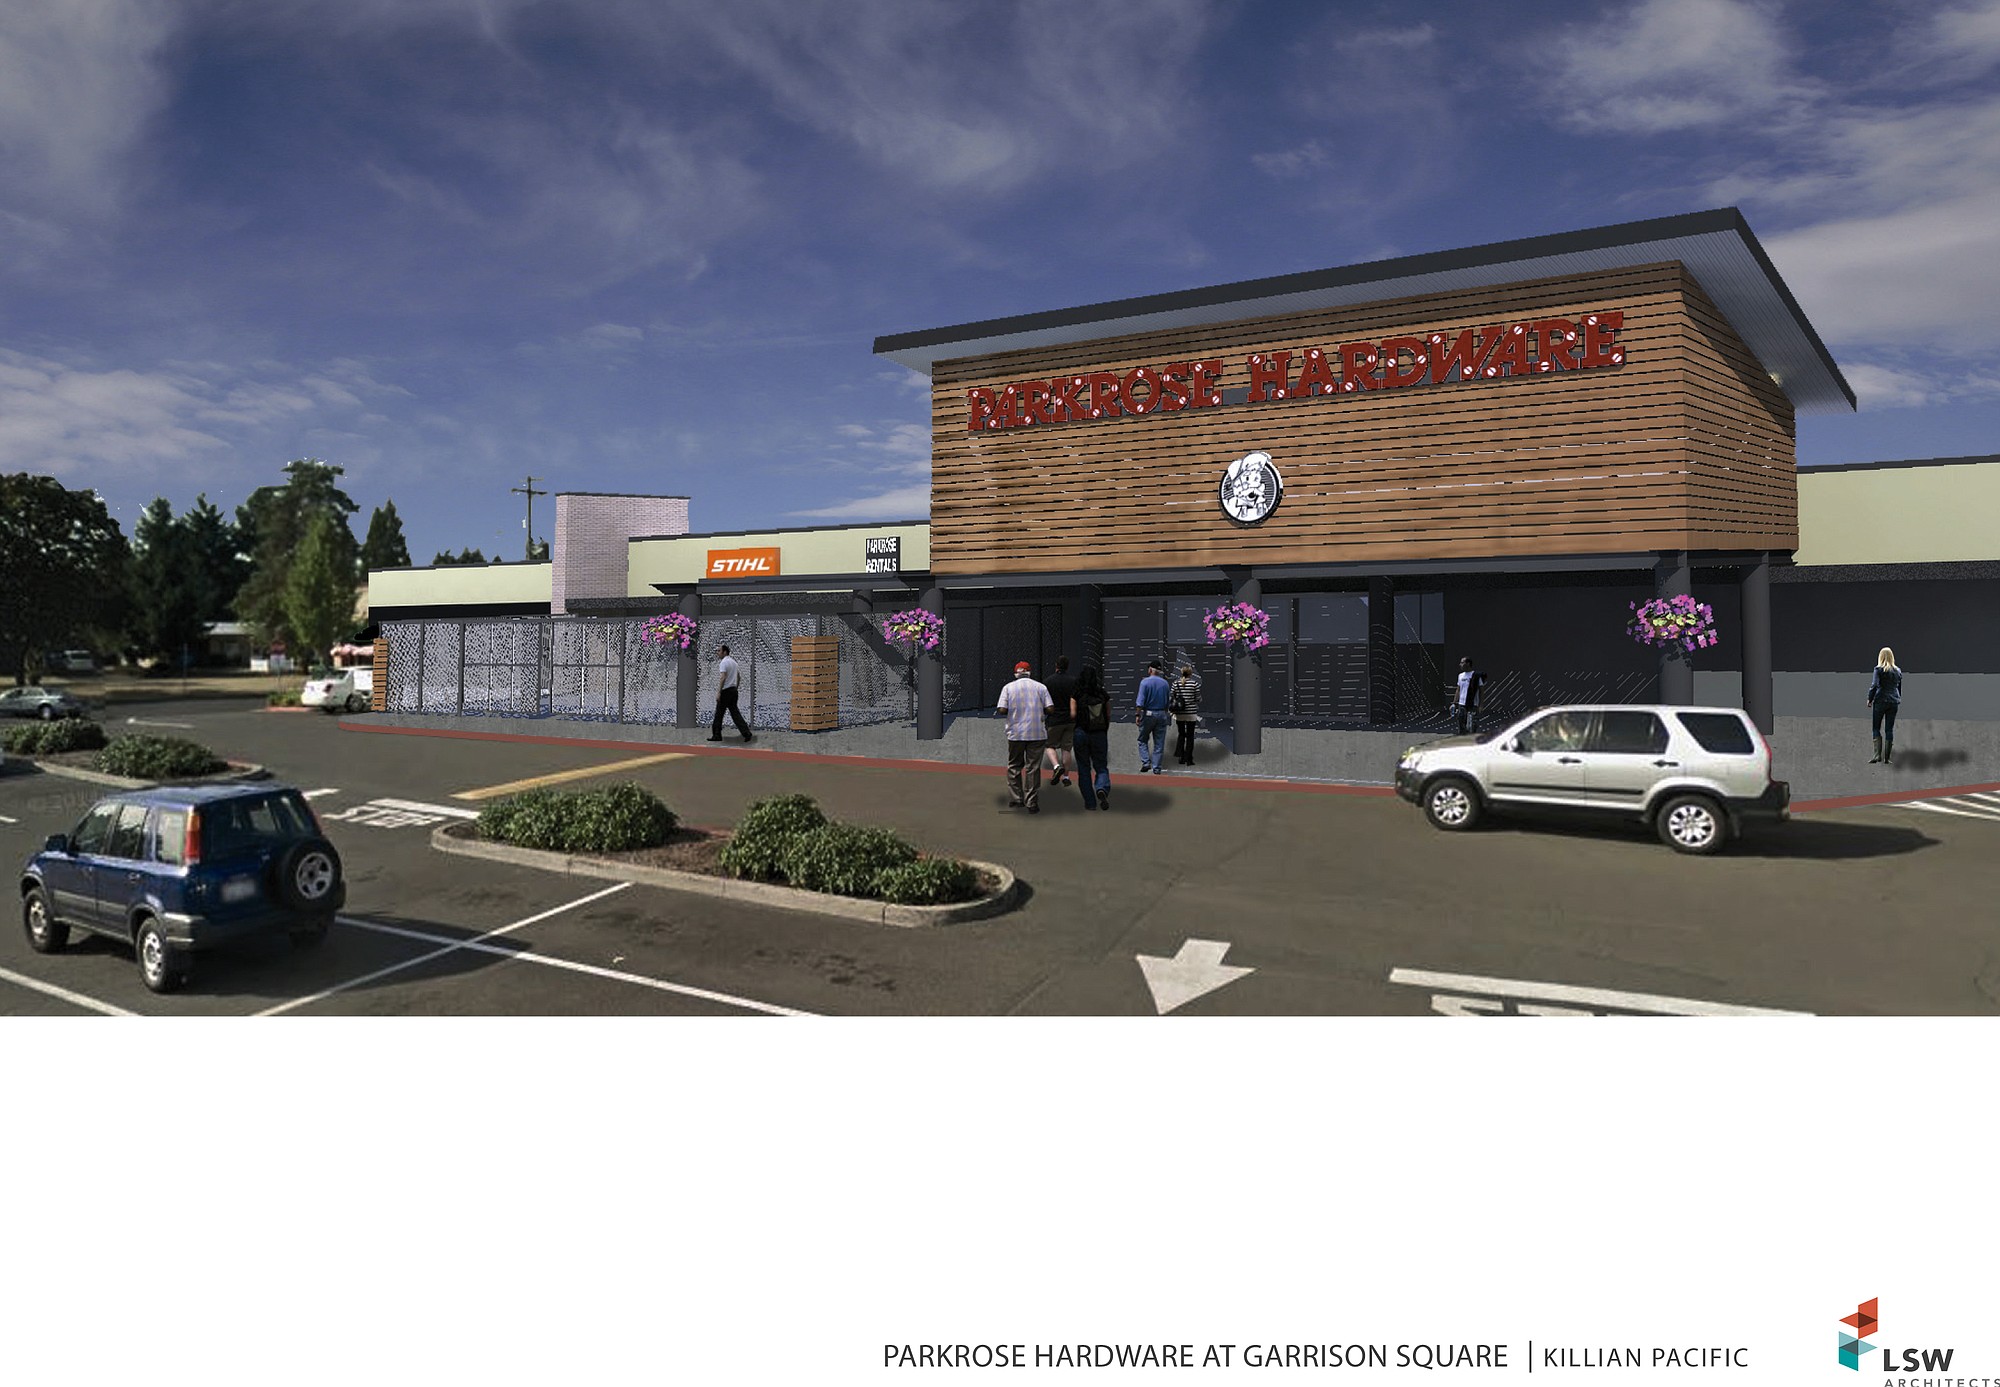 Parkrose Hardware will open a store at the Garrison Square shopping center in central Vancouver, which is being renamed The Mill.